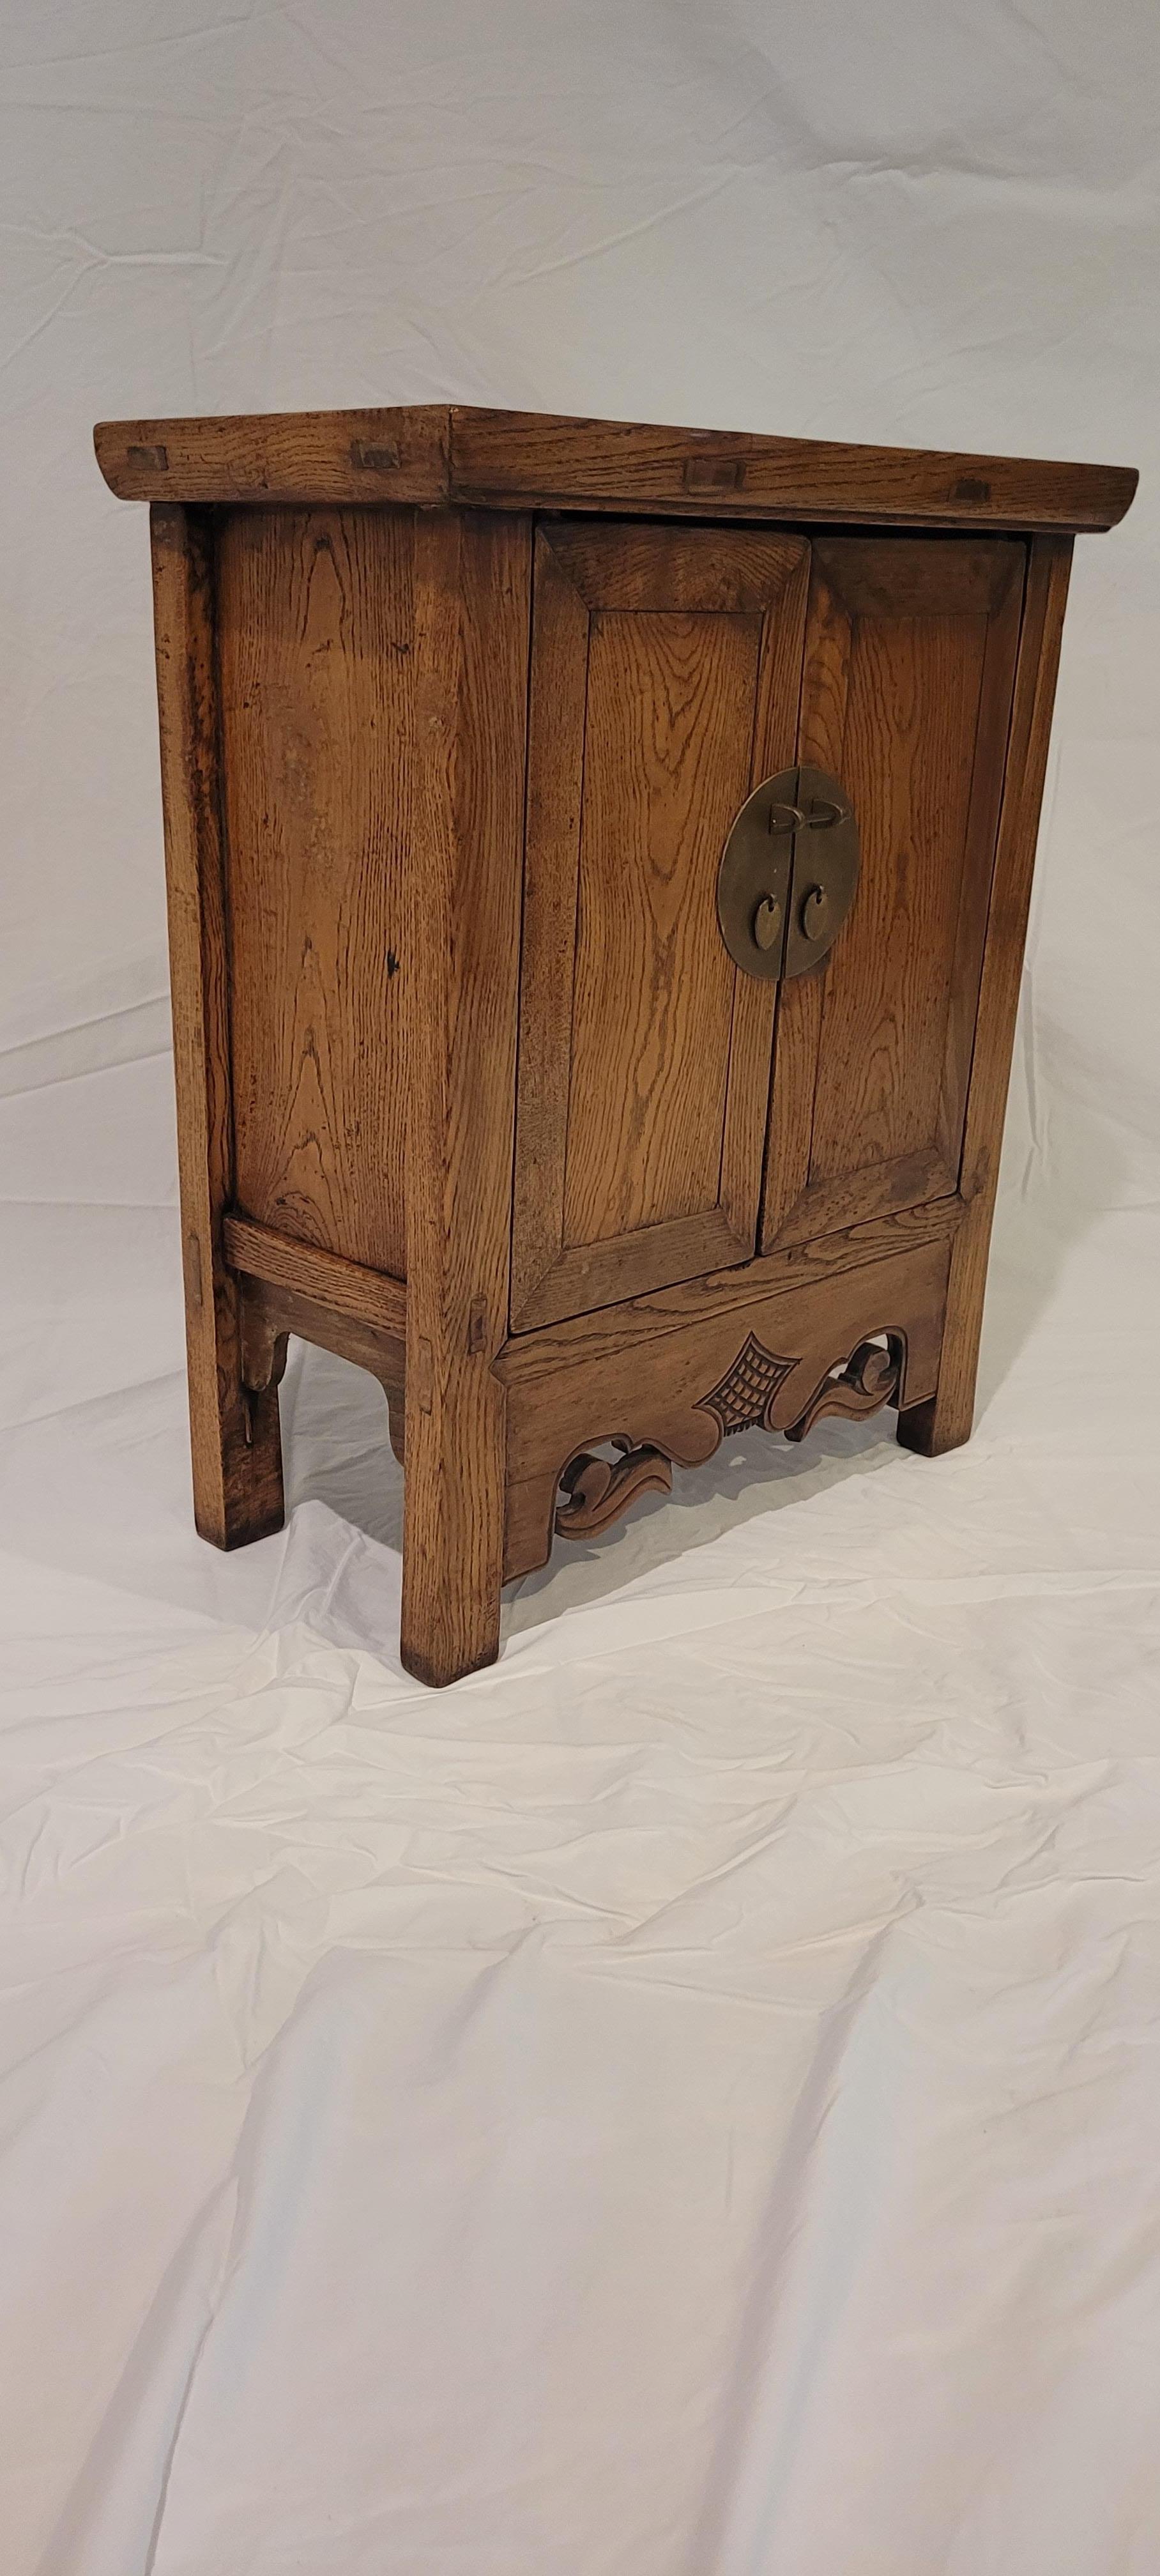 Small Kang Cabinet	22.25h x 18.5w x 9.75d
This small kang cabinet has a slight tapered form.  The aprons are done in open carved style carvings.  The metal on the front is round.  The frame of the top is mitered with mortised and tenoned members. 